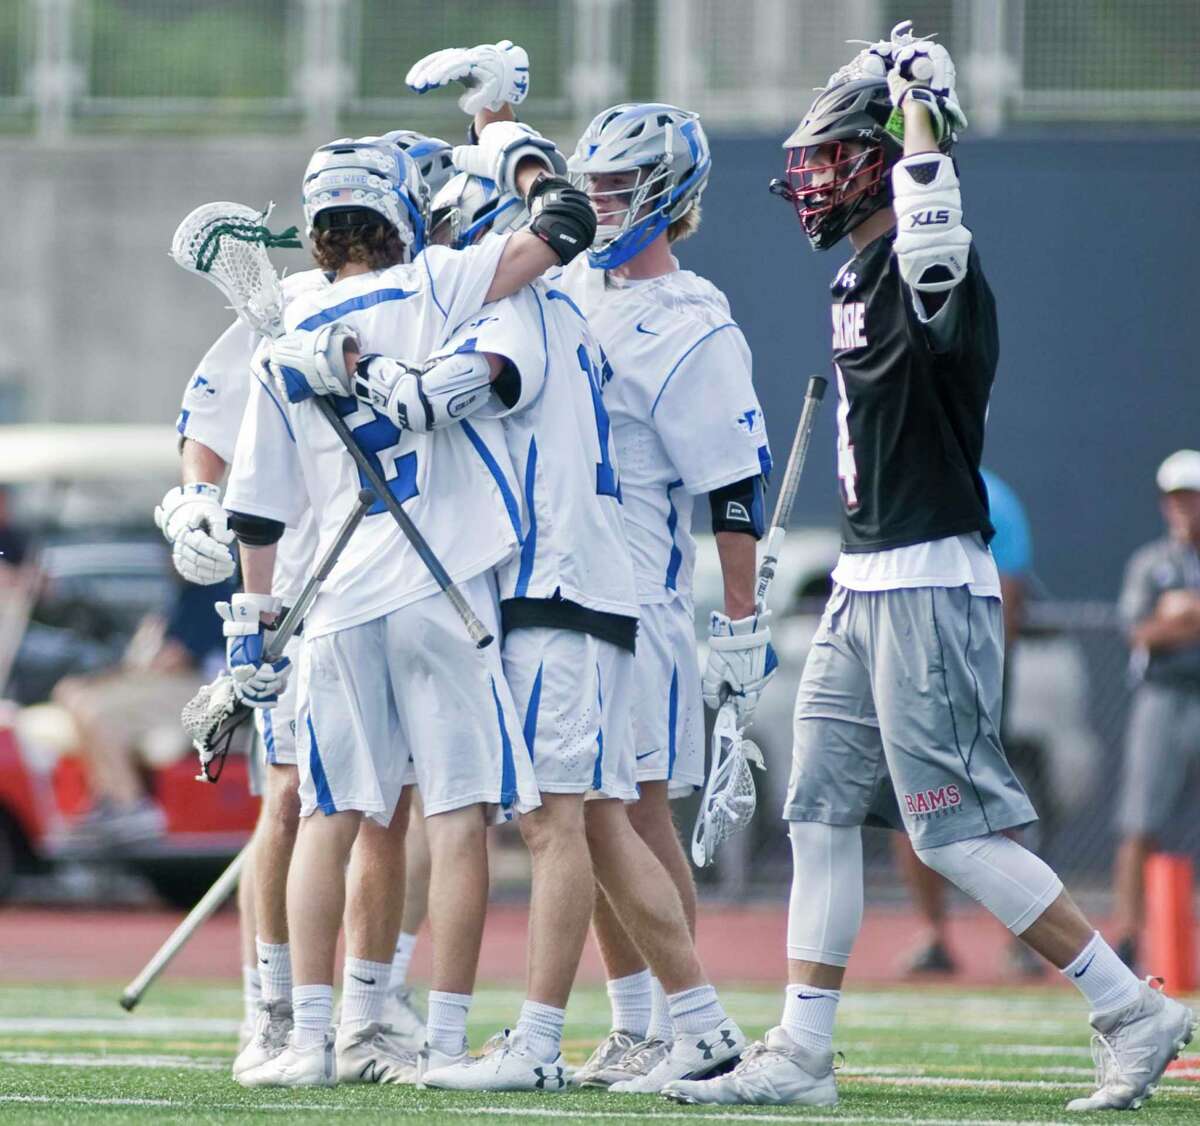 Darien High School players celebrate a goal in the Class L boys lacrosse championship against Cheshire High School, played at Brien McMahon High School in Norwalk. Saturday, June 10, 2017